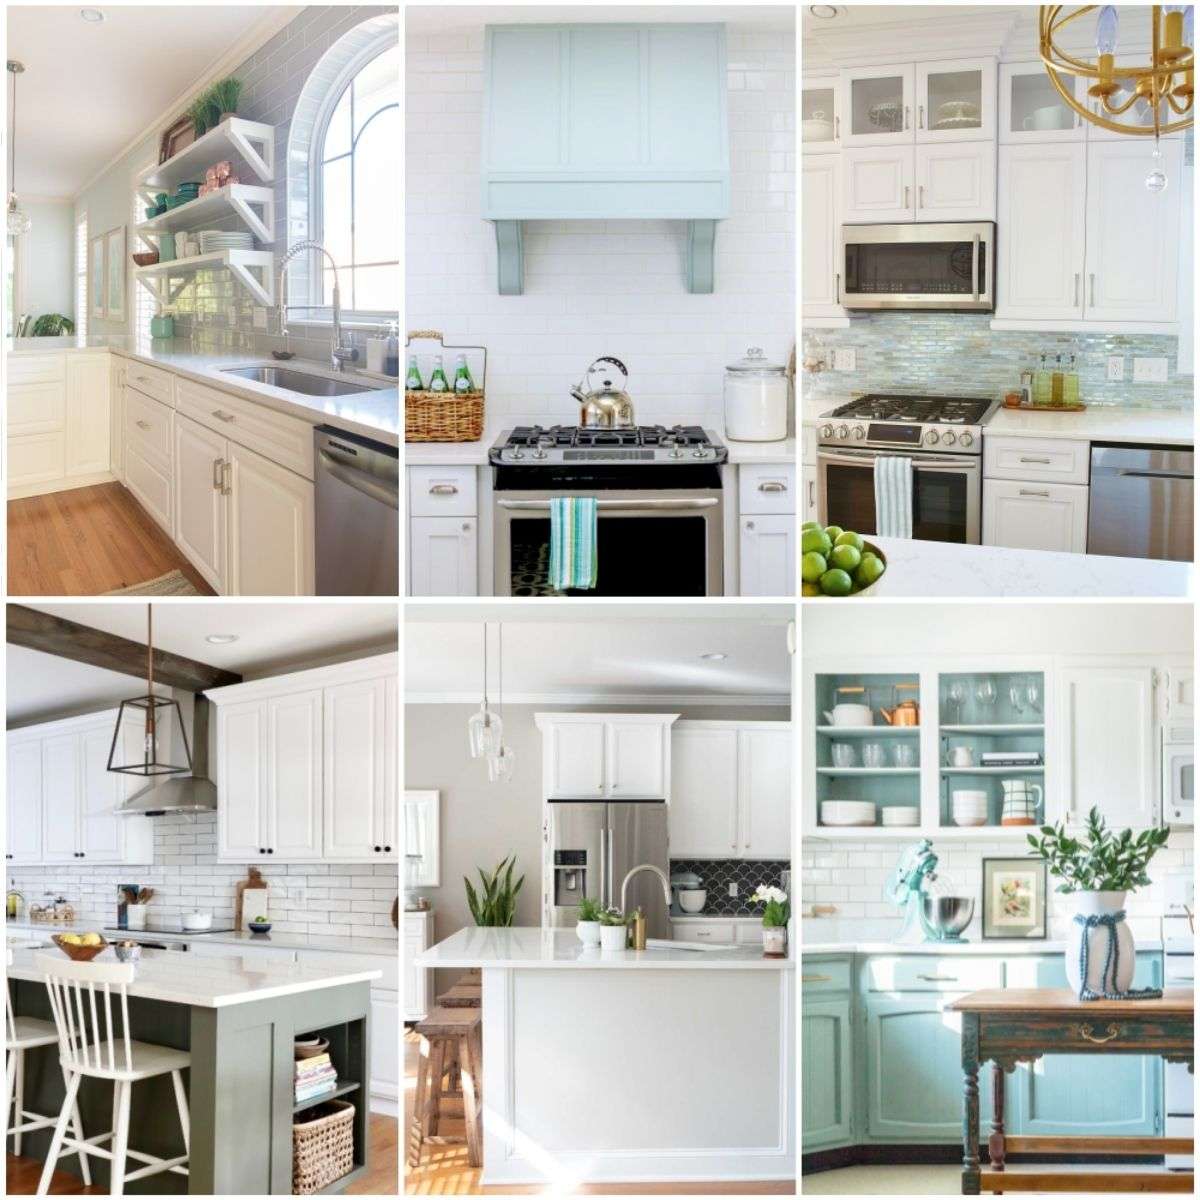 18 Beachy Kitchen Paint Ideas To Go With White Cabinets   Coastal ...